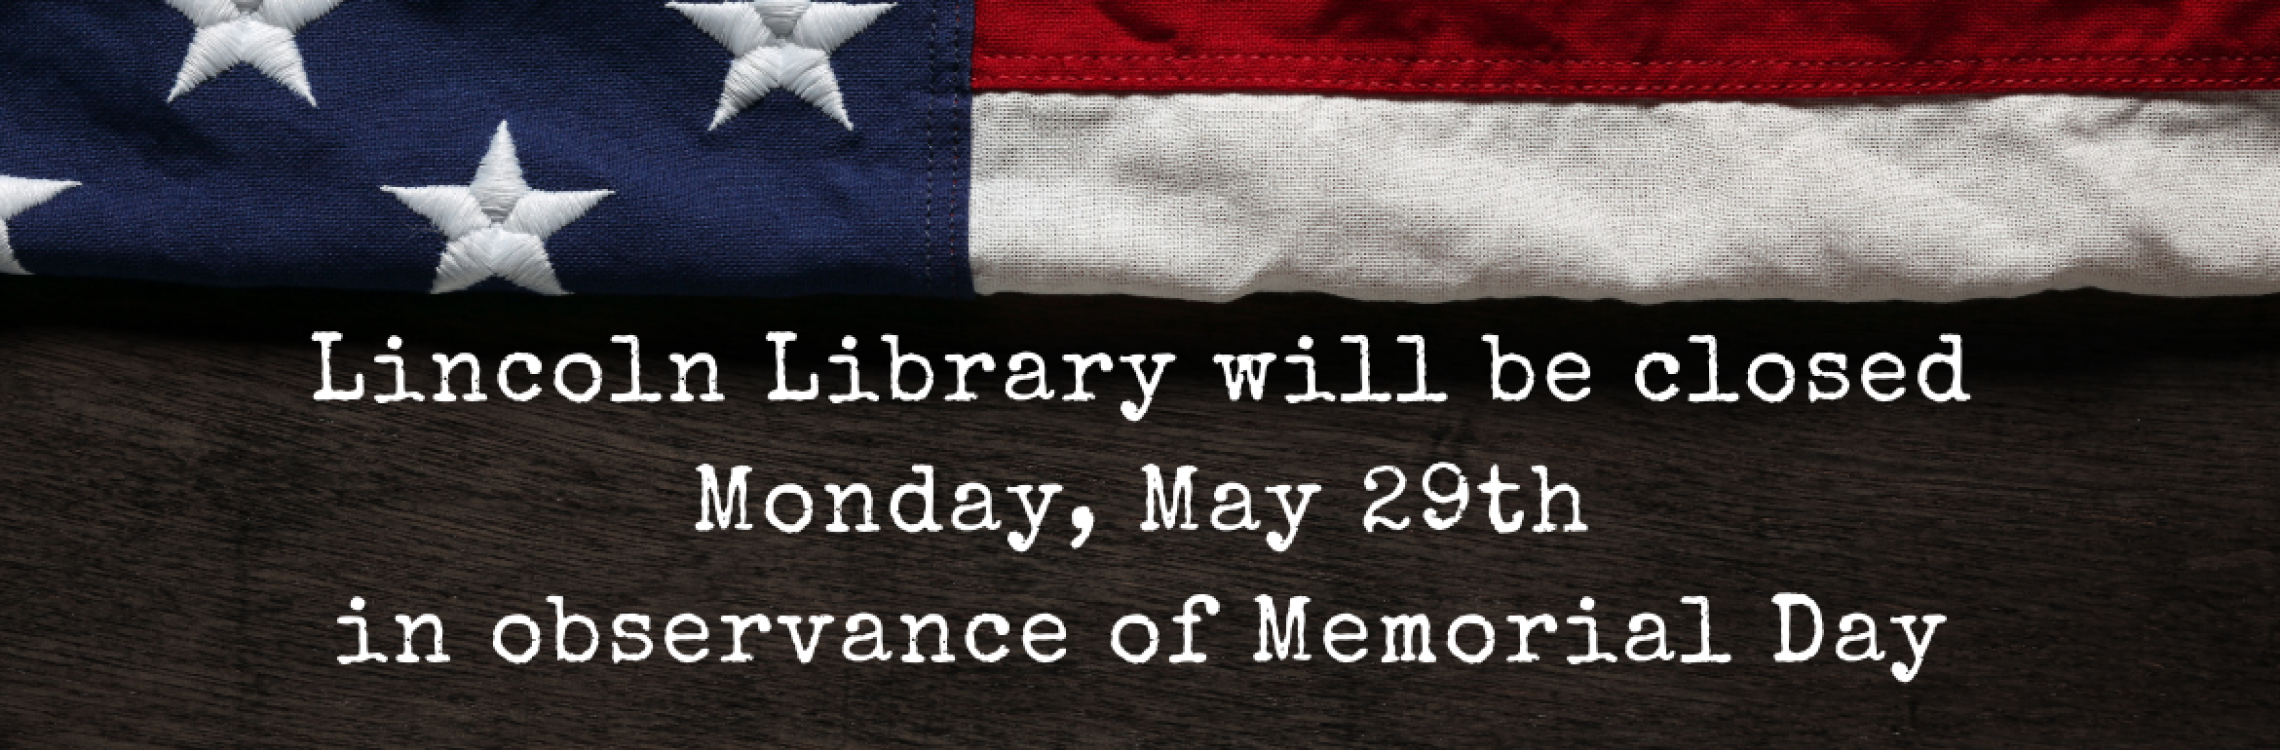 Lincoln Library will be closed Monday, May 29th in observance of Memorial Day